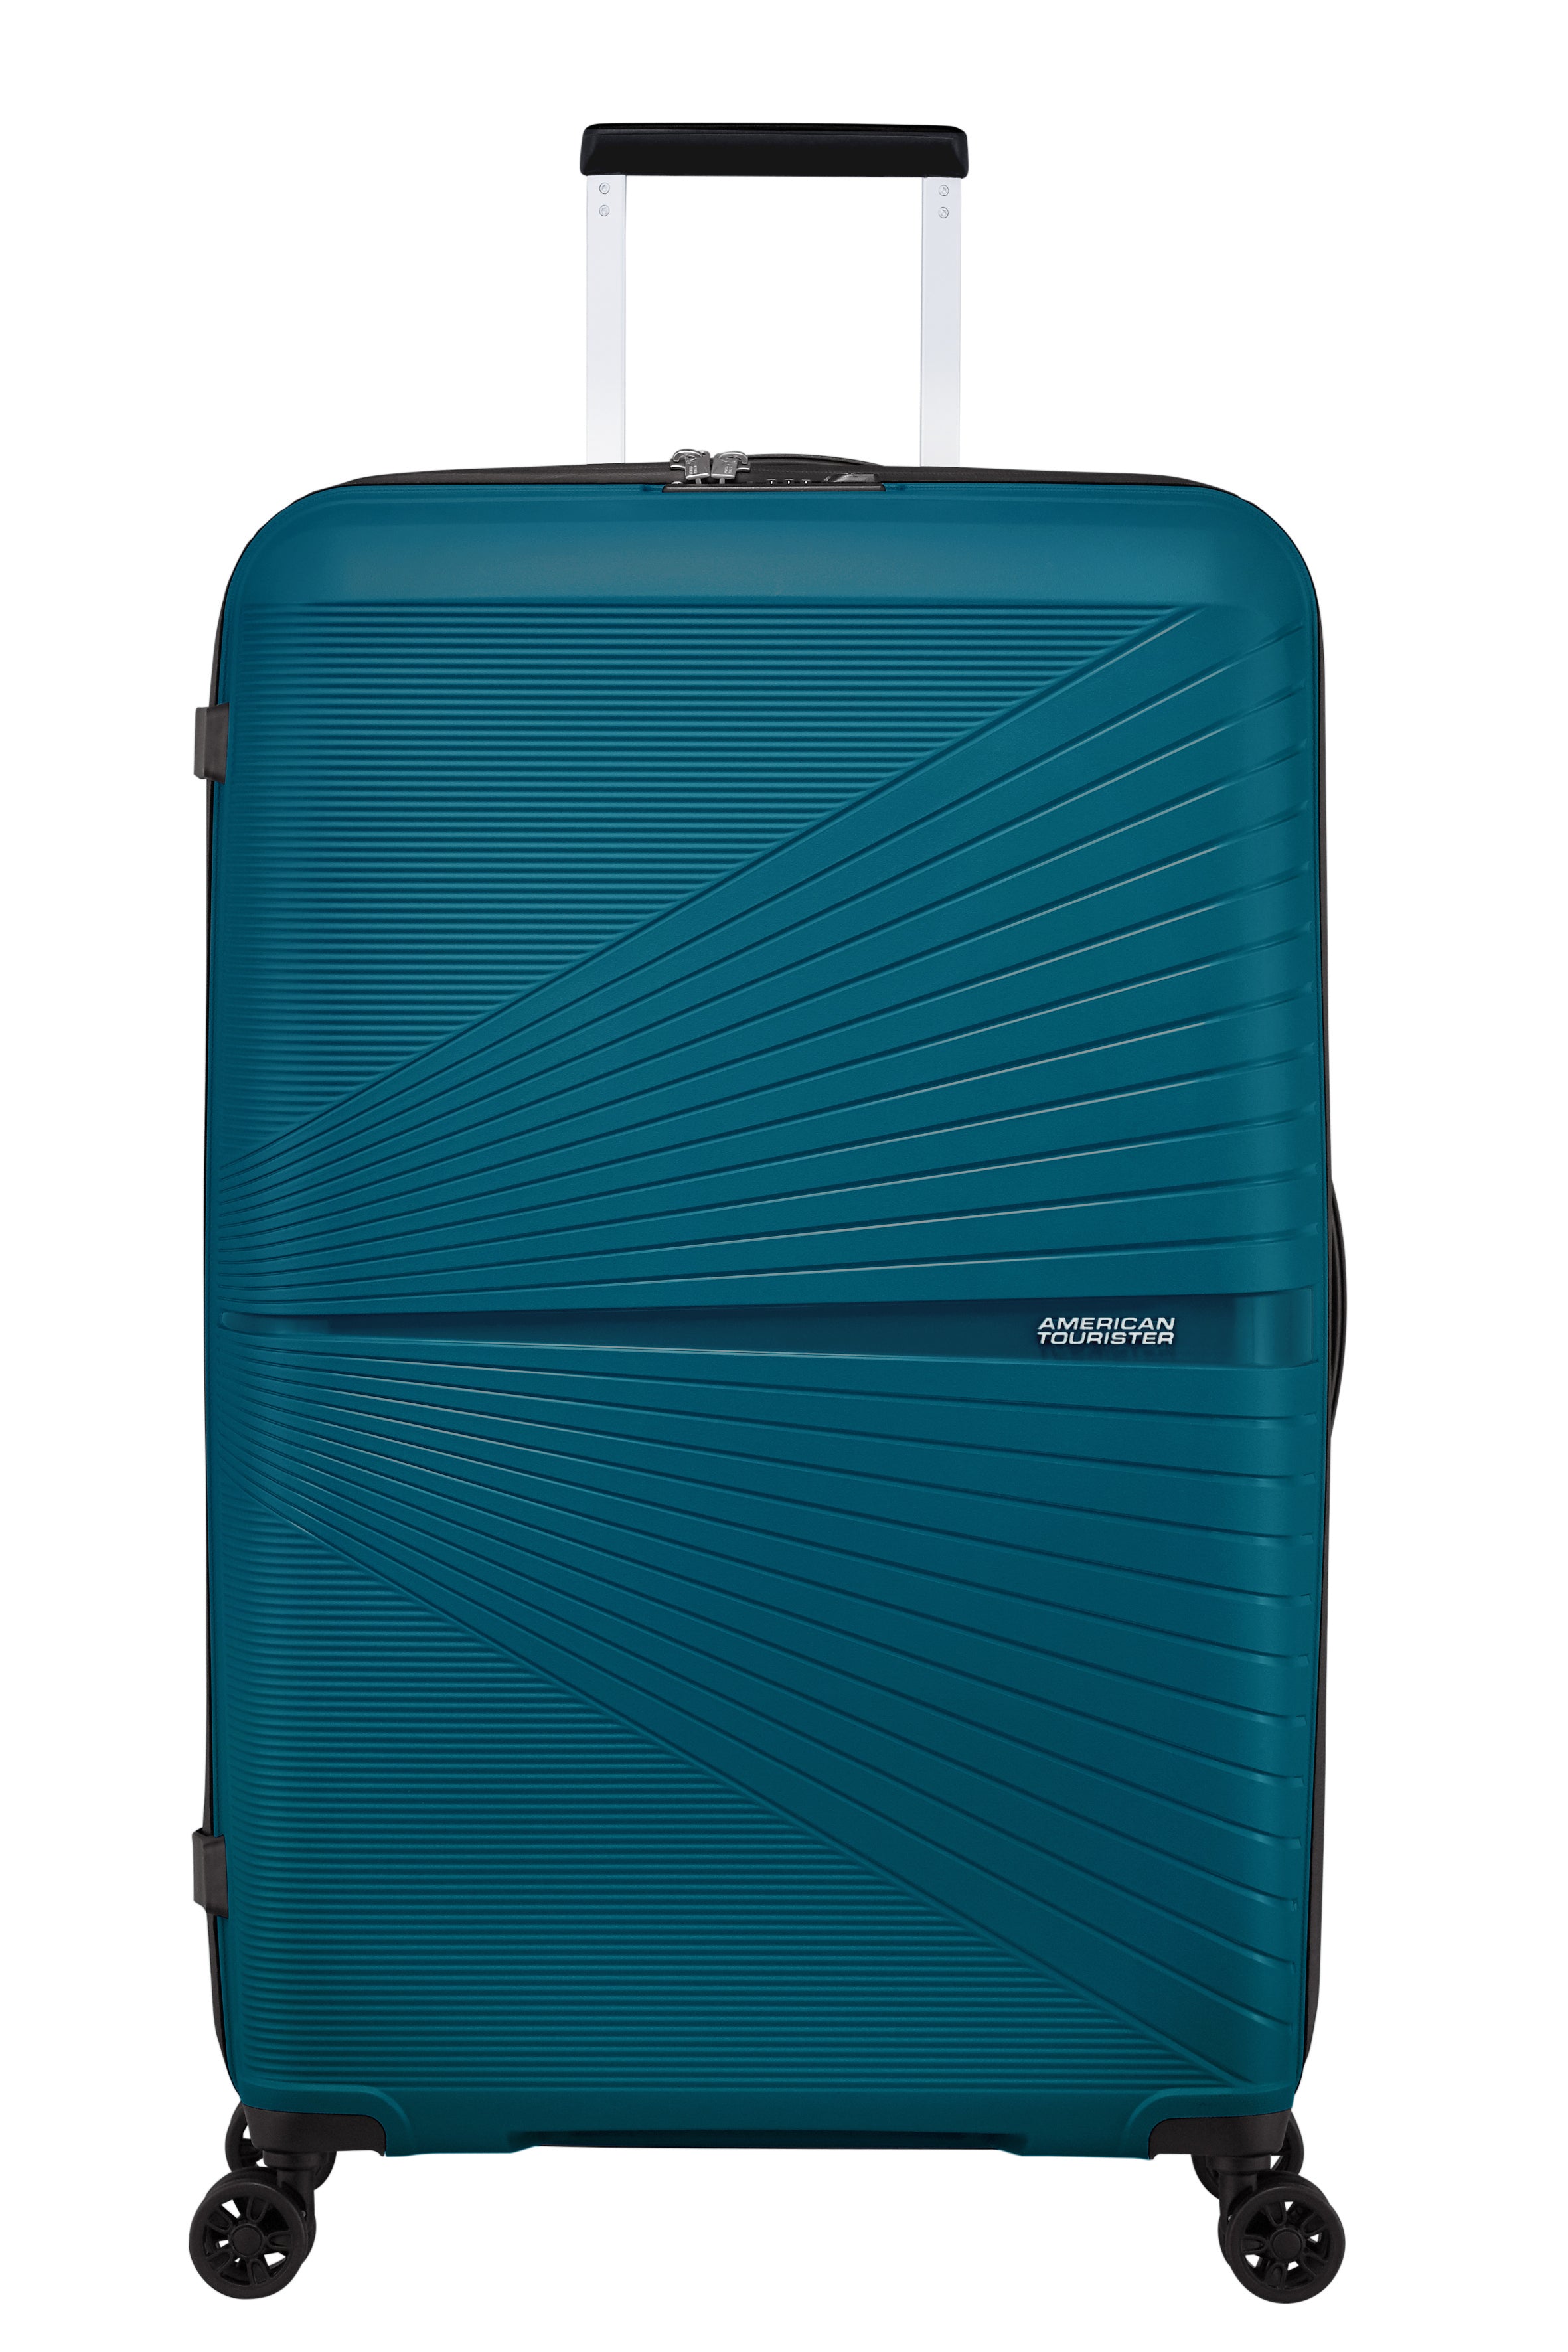 American Tourister - Airconic 77cm Large Suitcase - Deep Ocean - 0